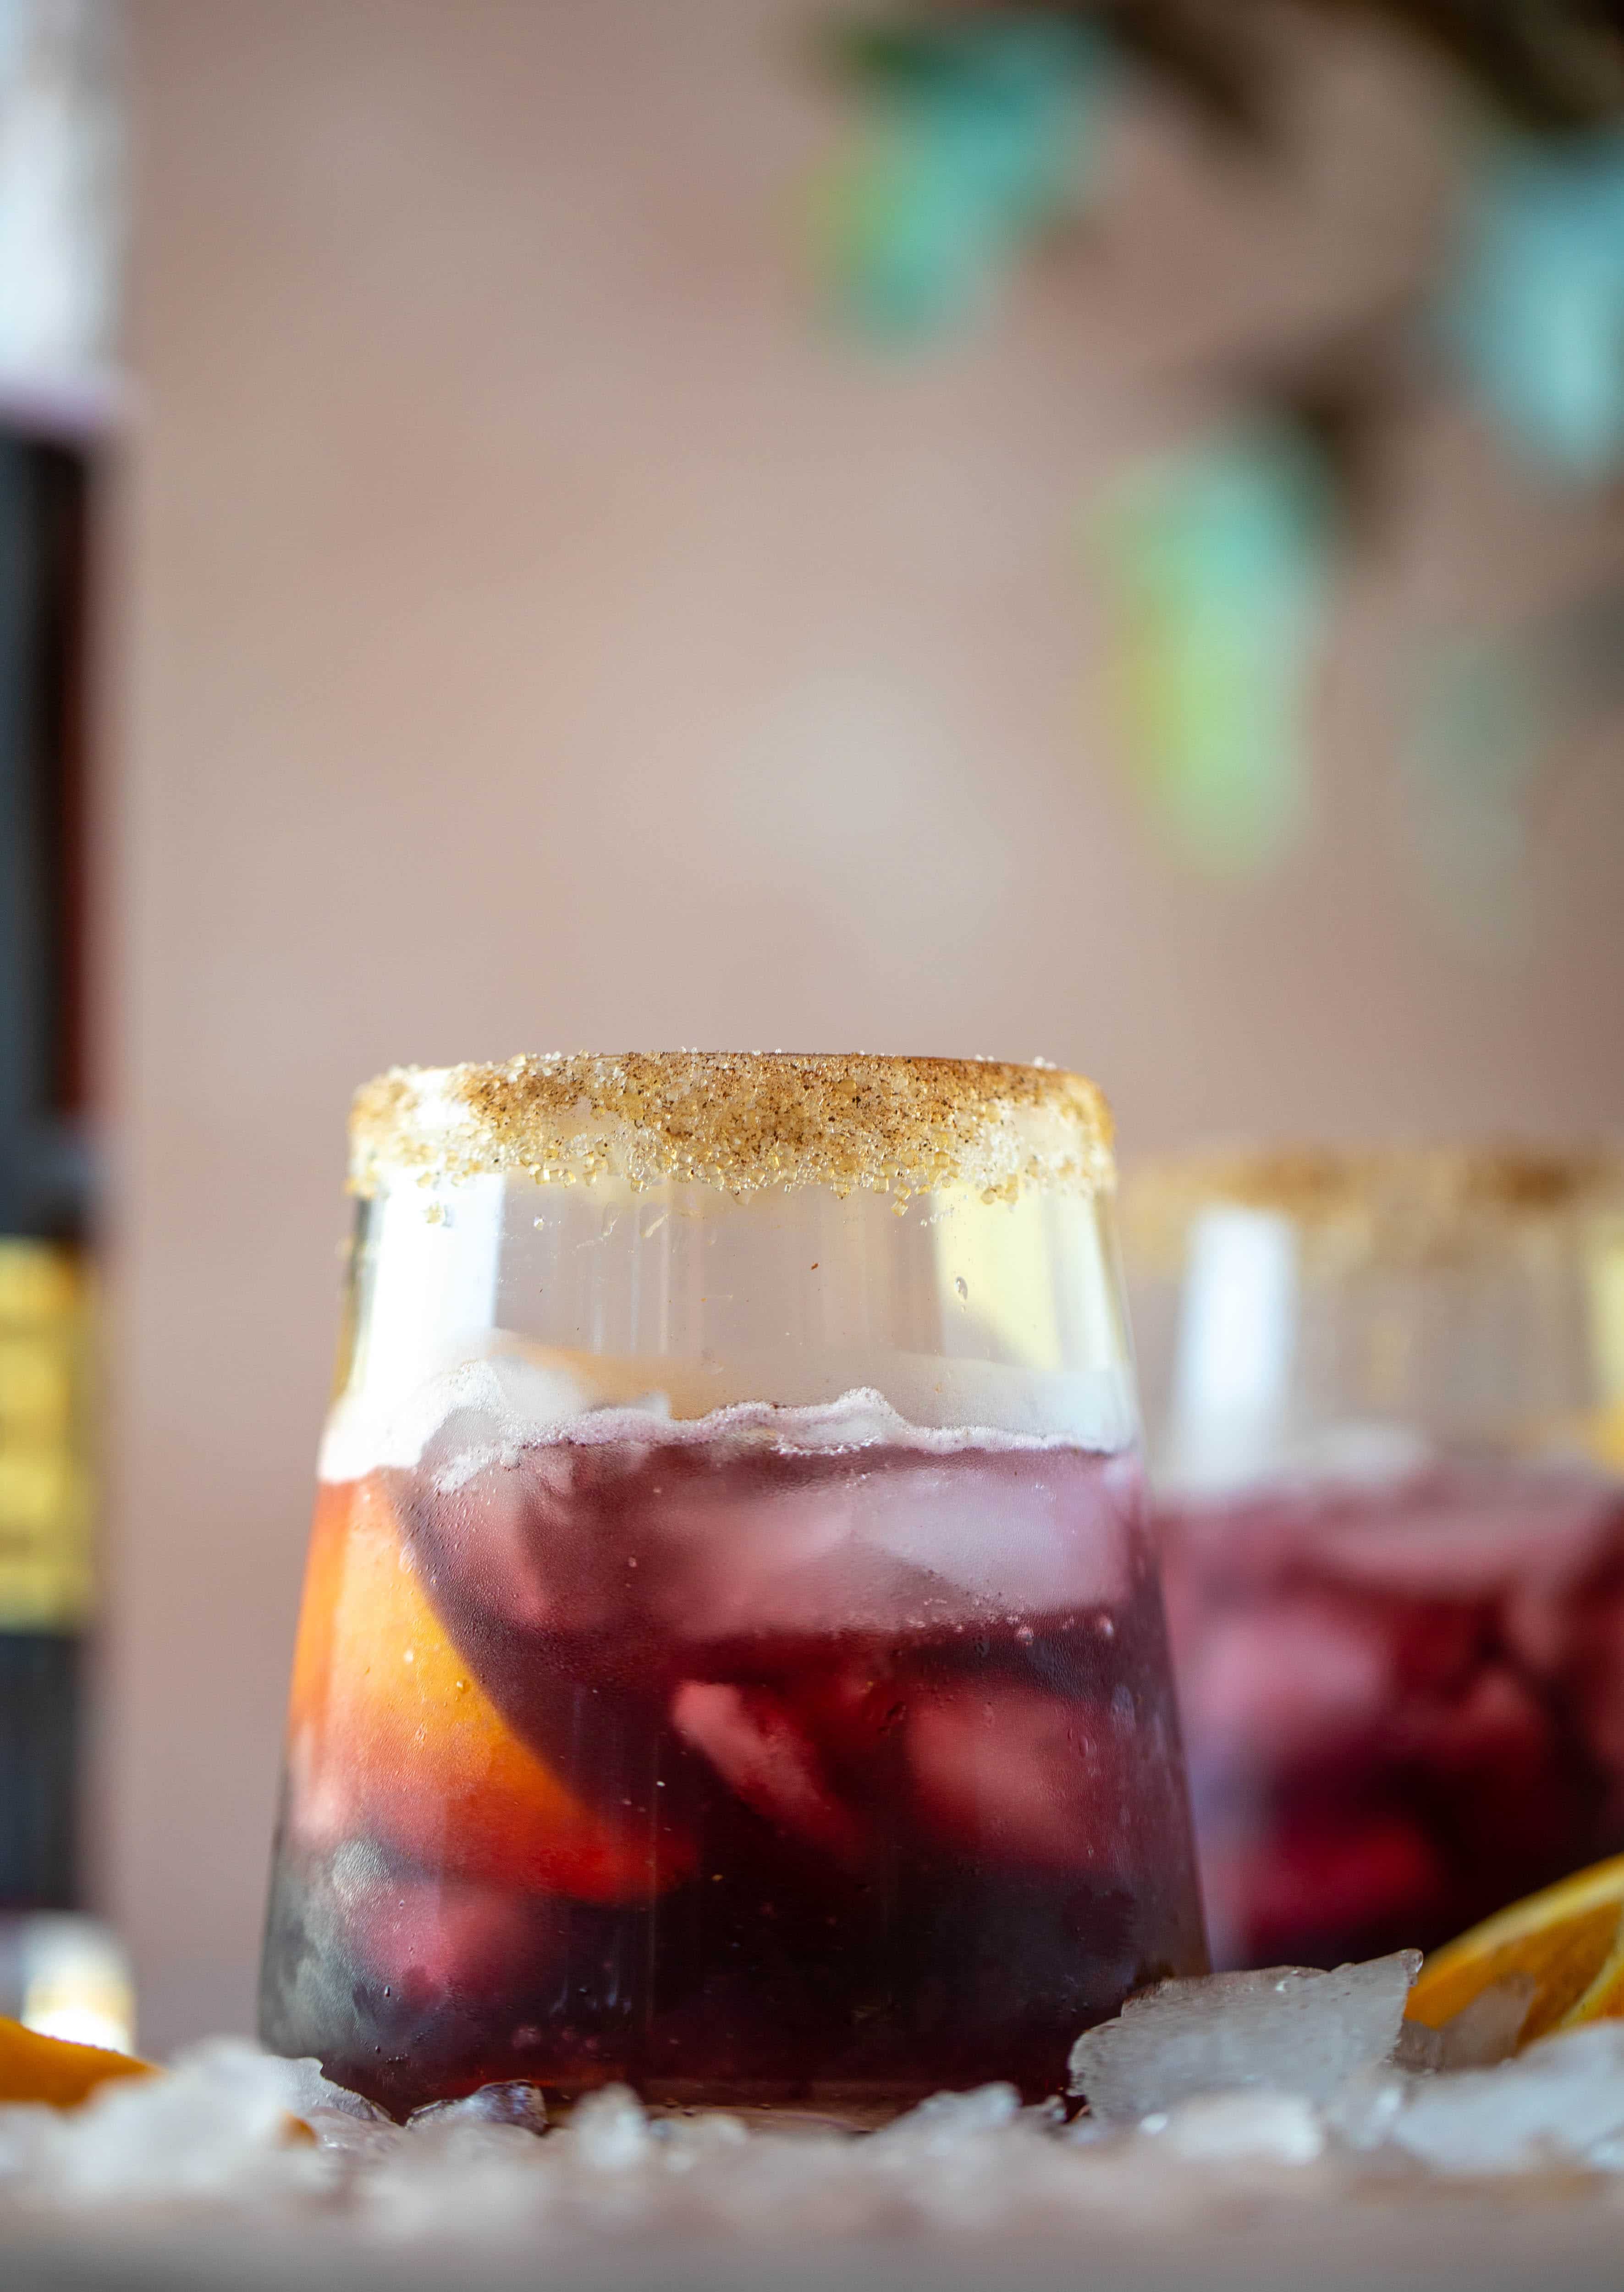 A refreshing and warming lambrusco smash, made with bubbly red wine, bourbon, orange soda and maple syrup. Tastes like the holidays!